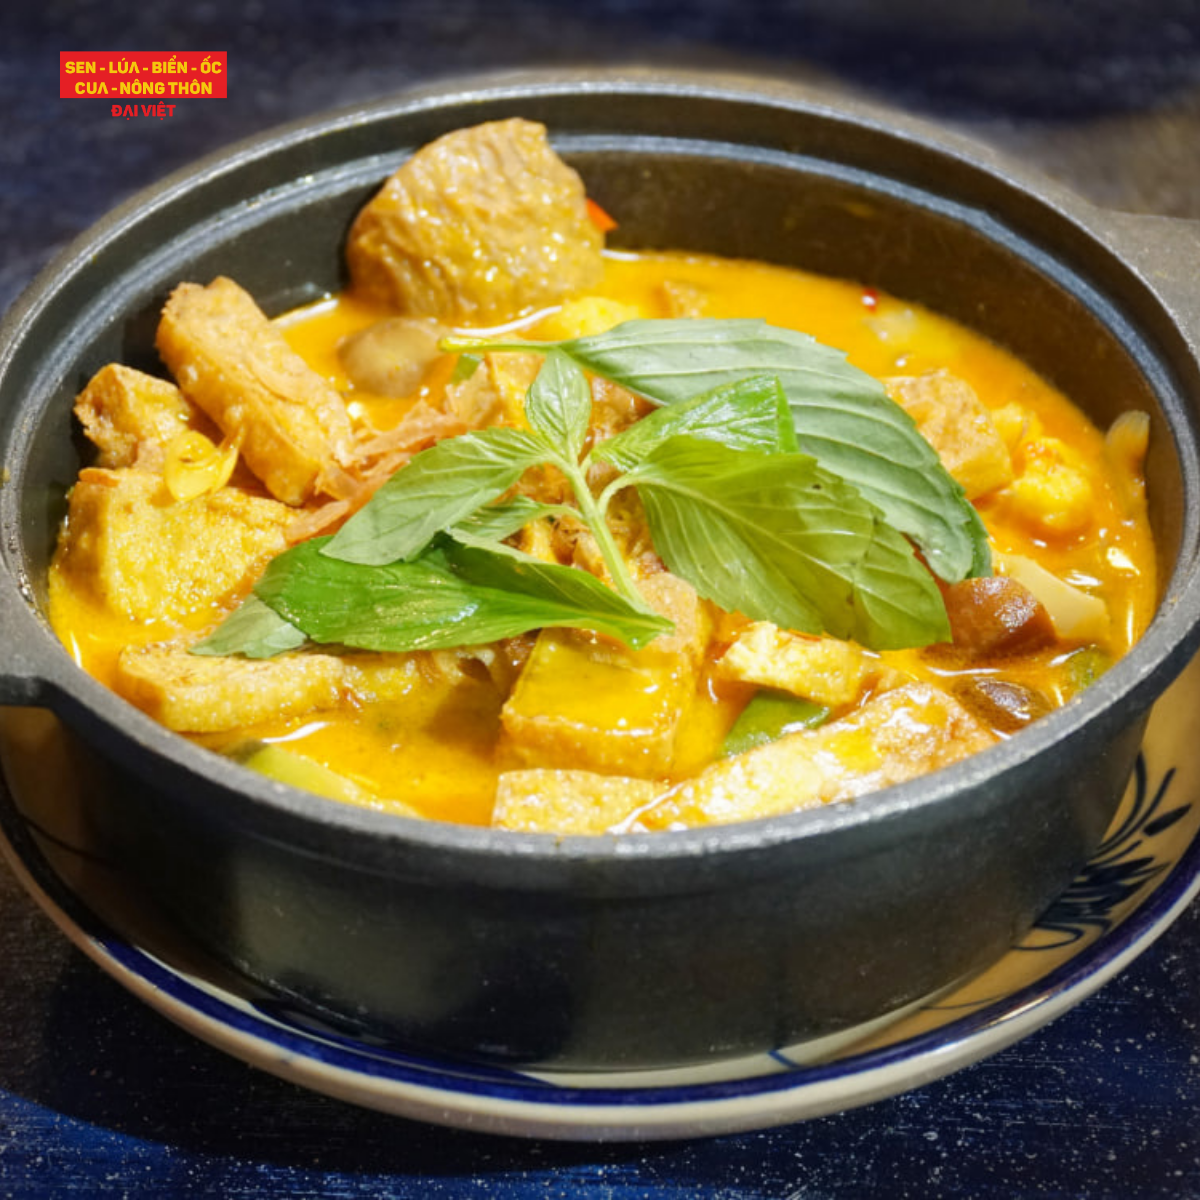  Vegetarian Curry With Tofu, Potatoes, And Carrots, Mushroom, Served With Steamed Rice - Cà Ri Chay 